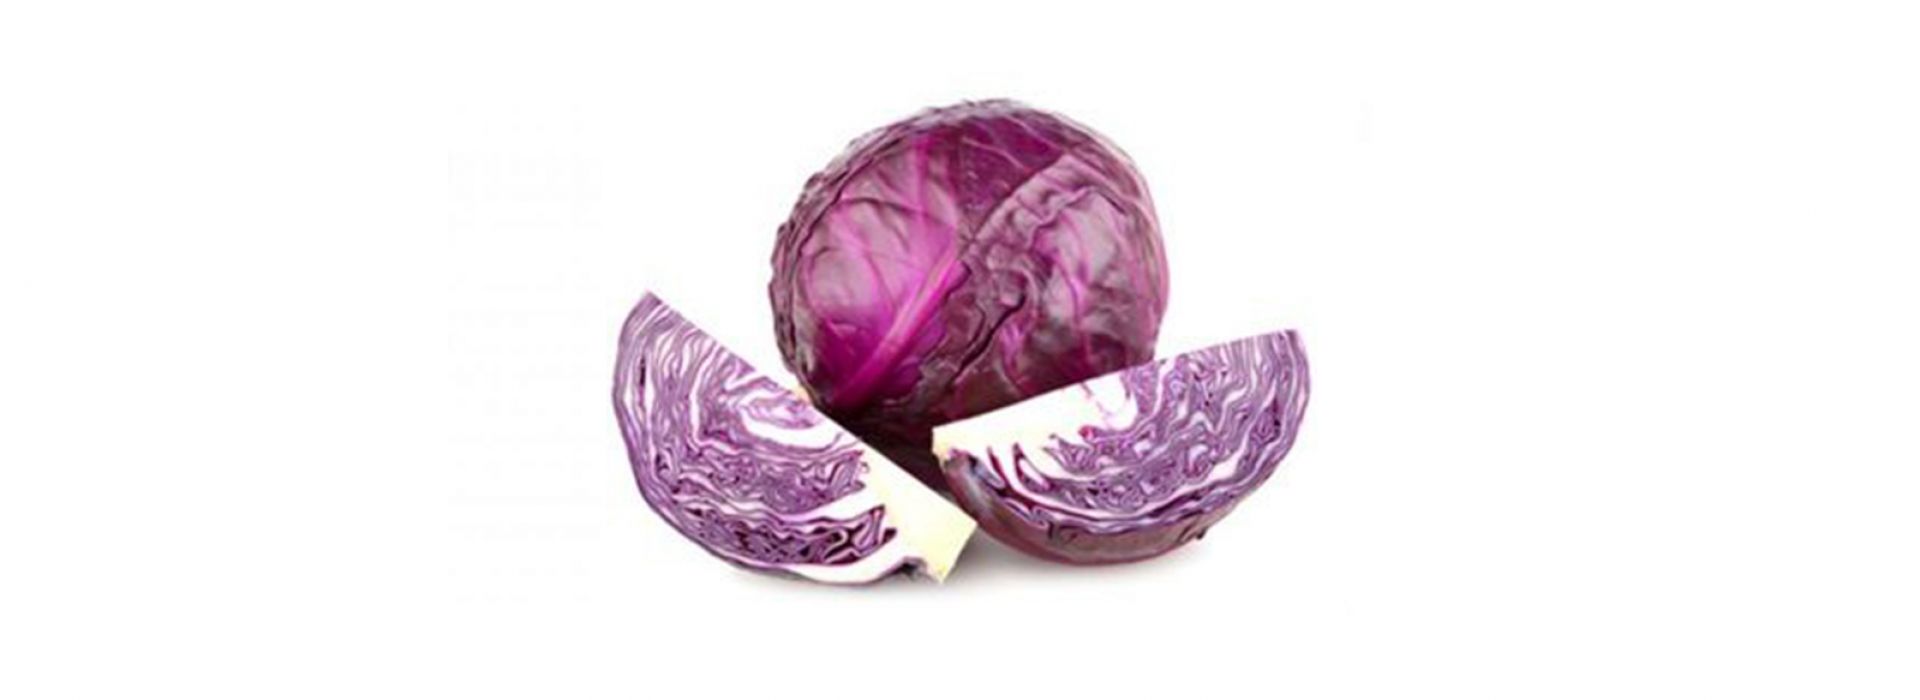 Sprout Red Cabbage